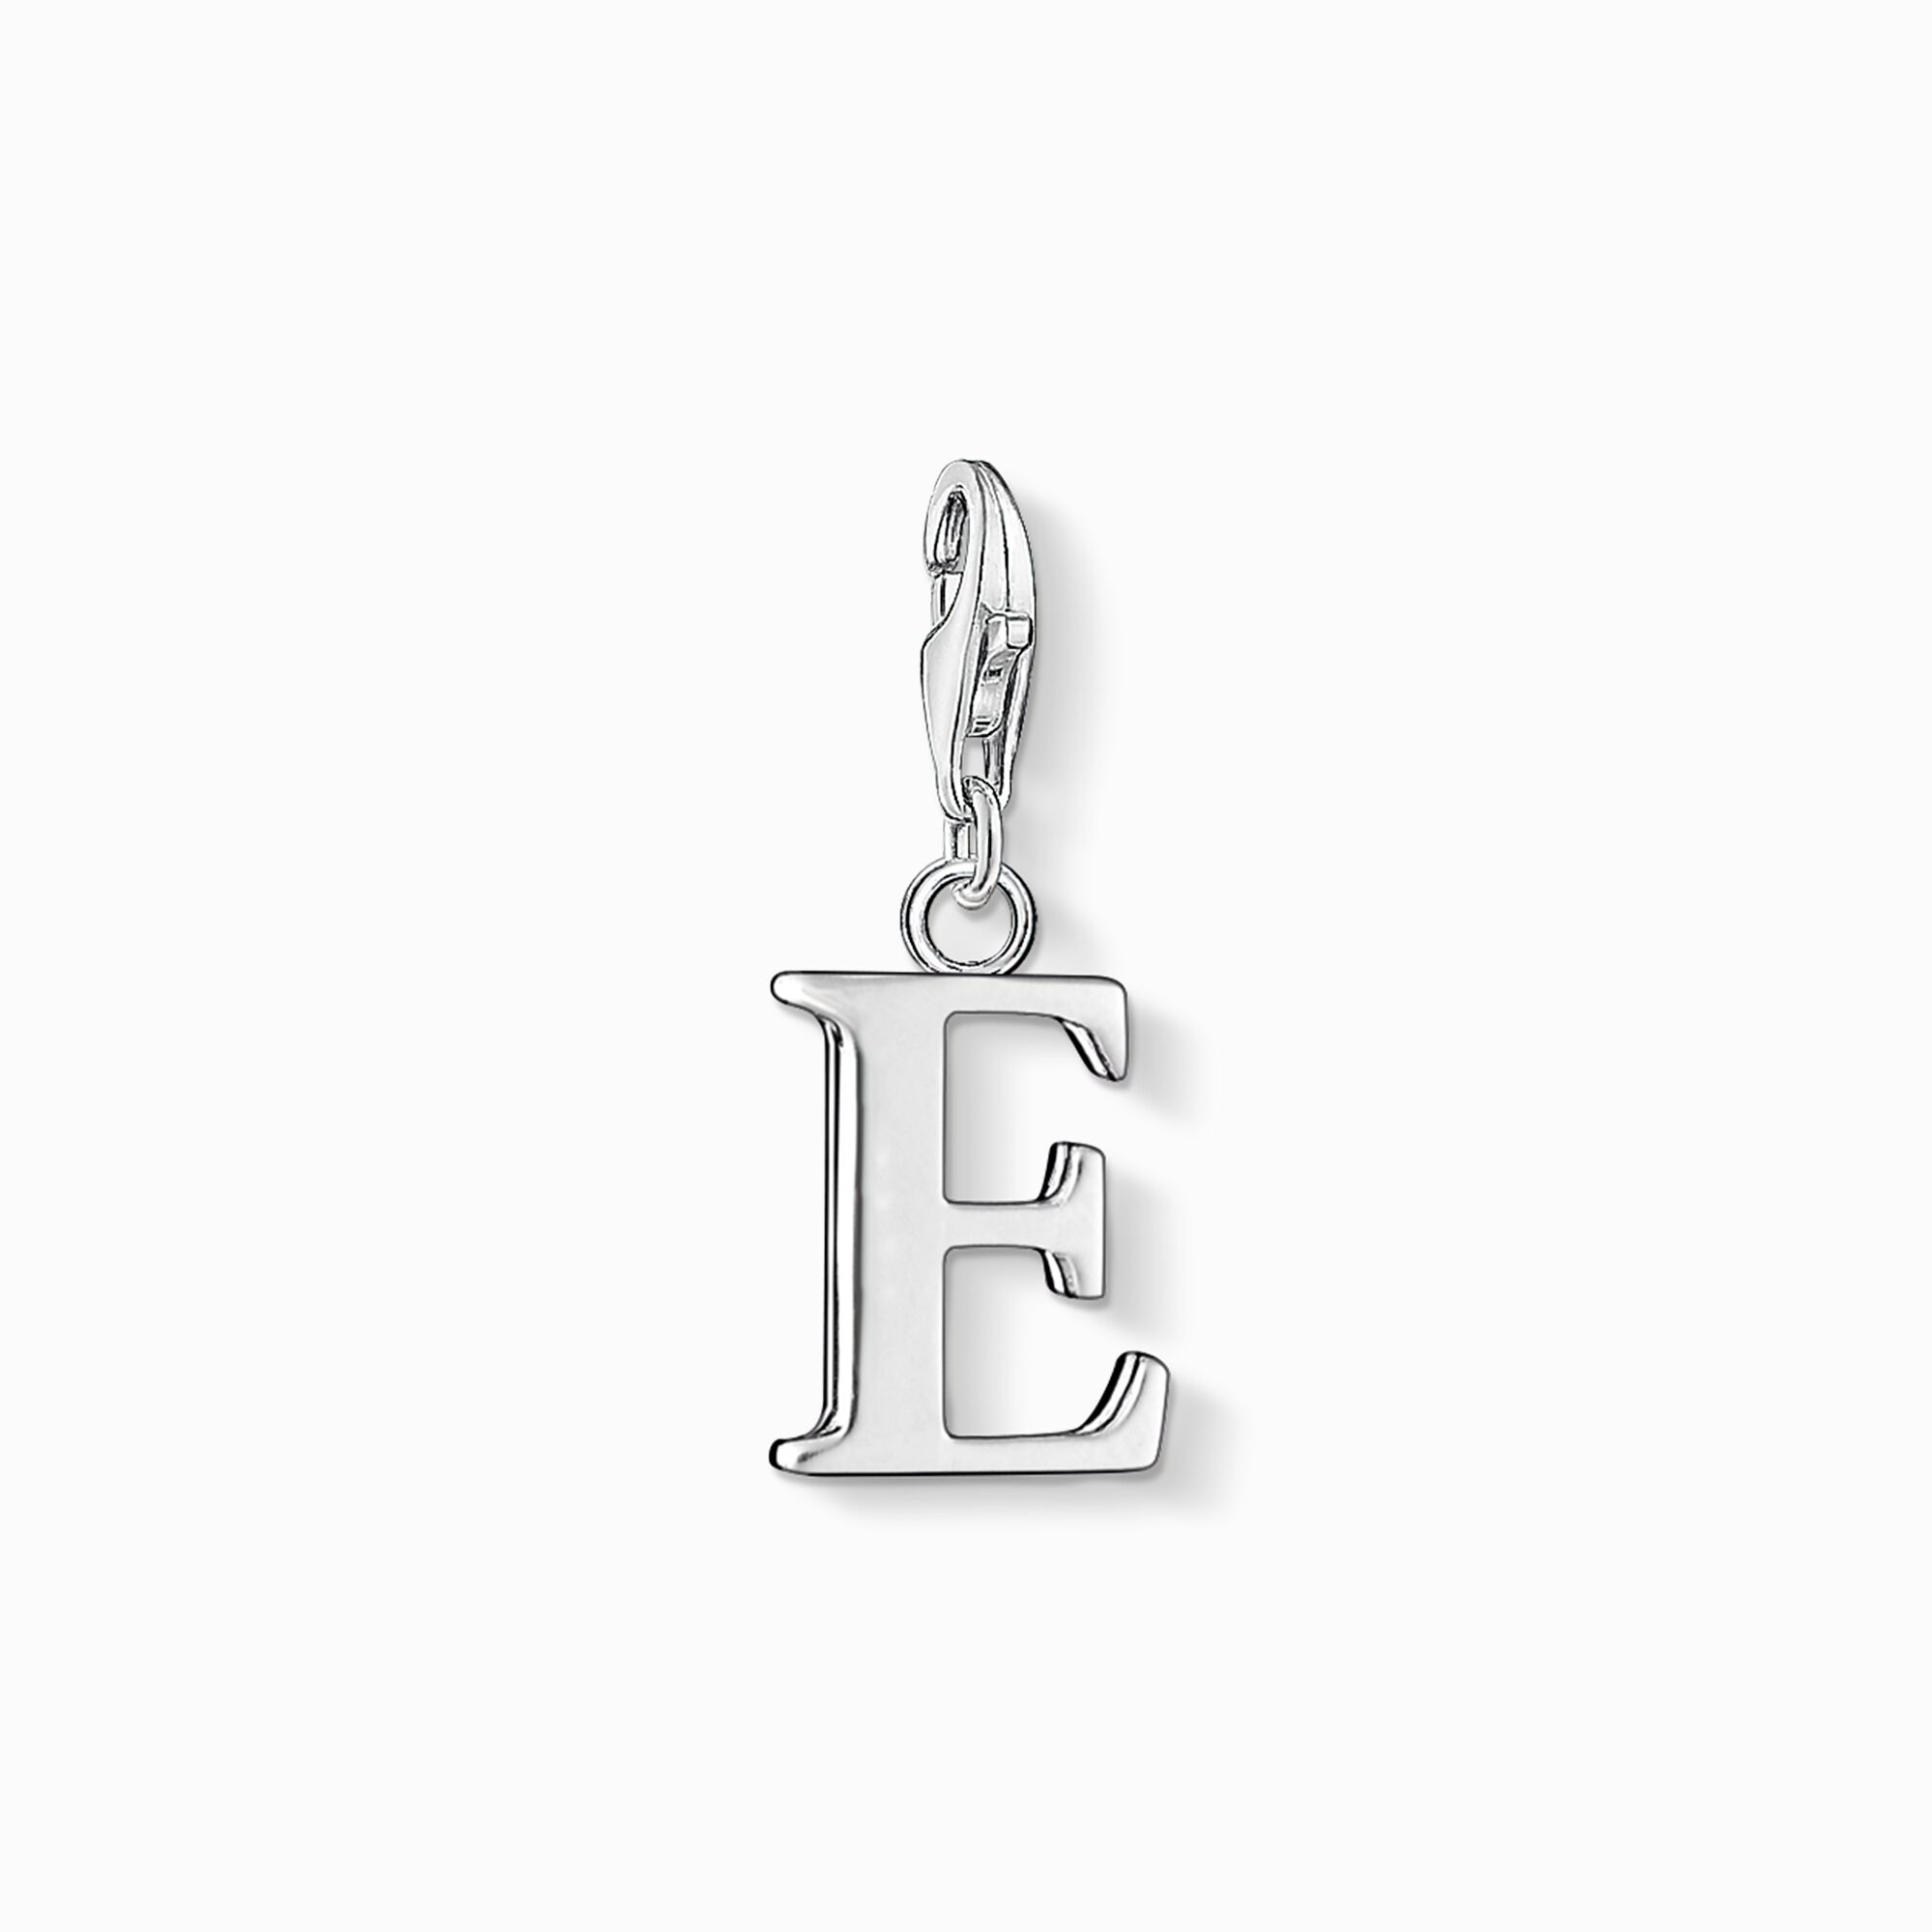 Charm pendant letter E from the Charm Club collection in the THOMAS SABO online store